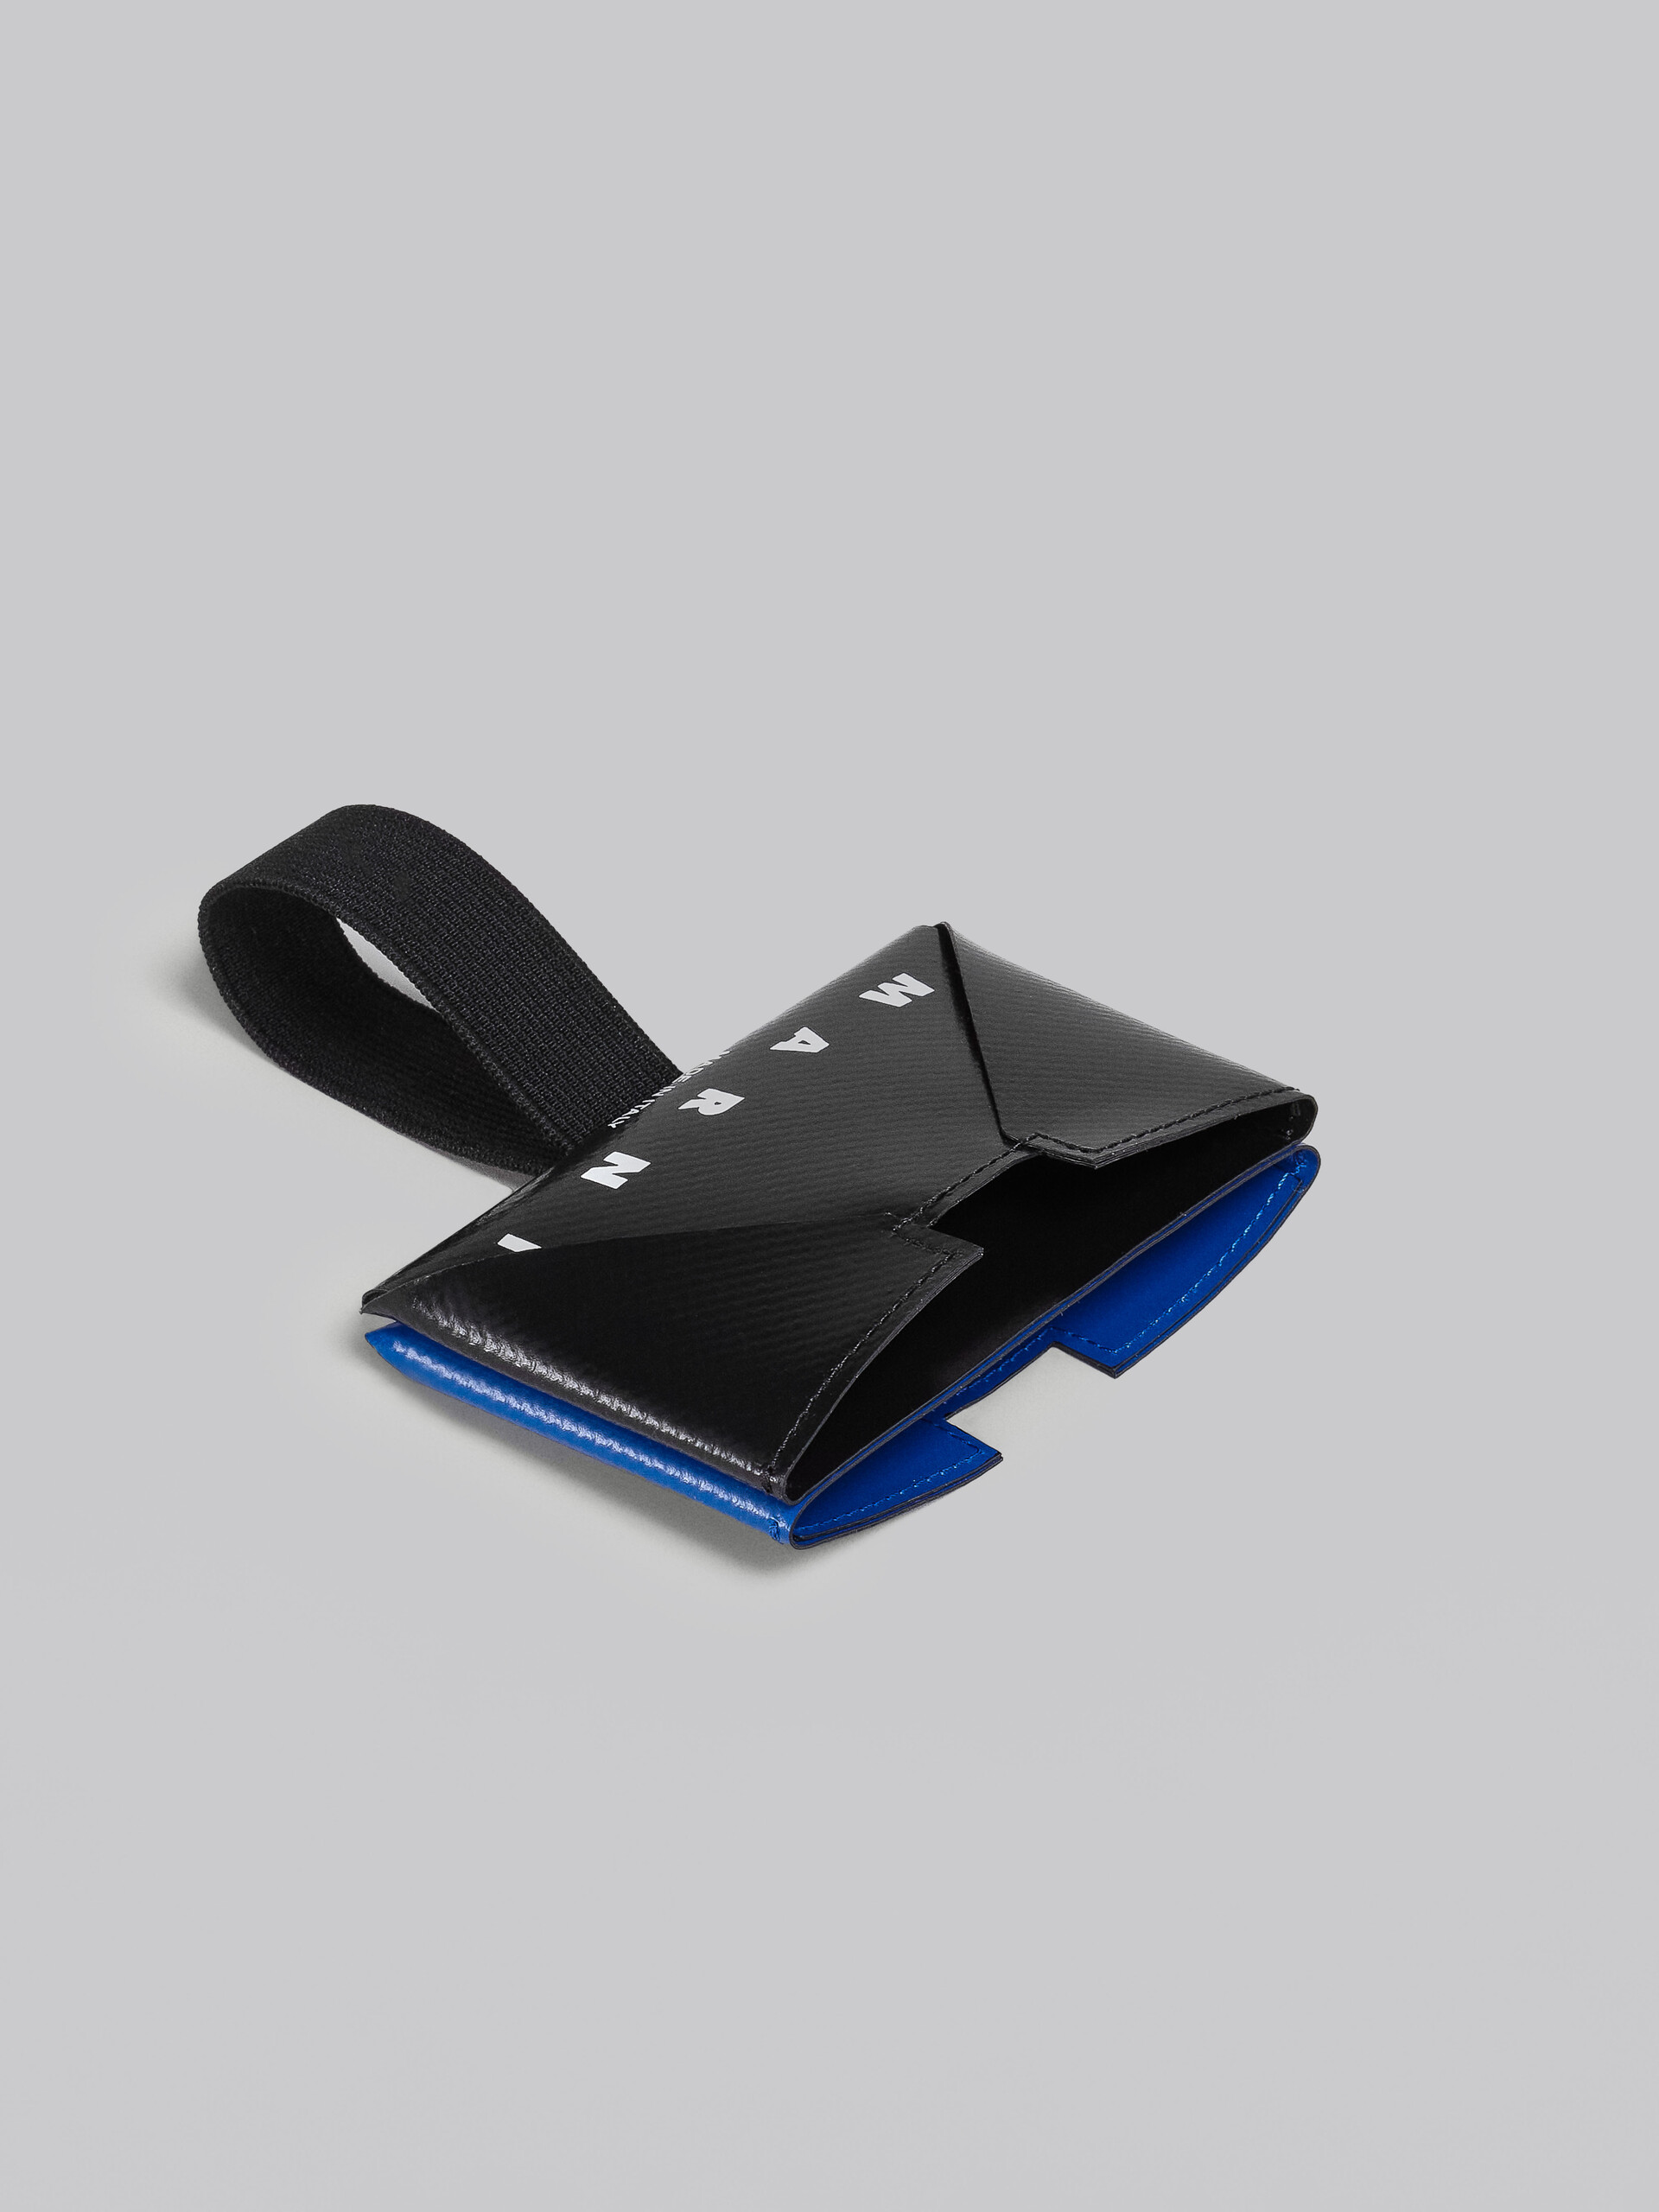 Black and blue card case - Wallets - Image 2